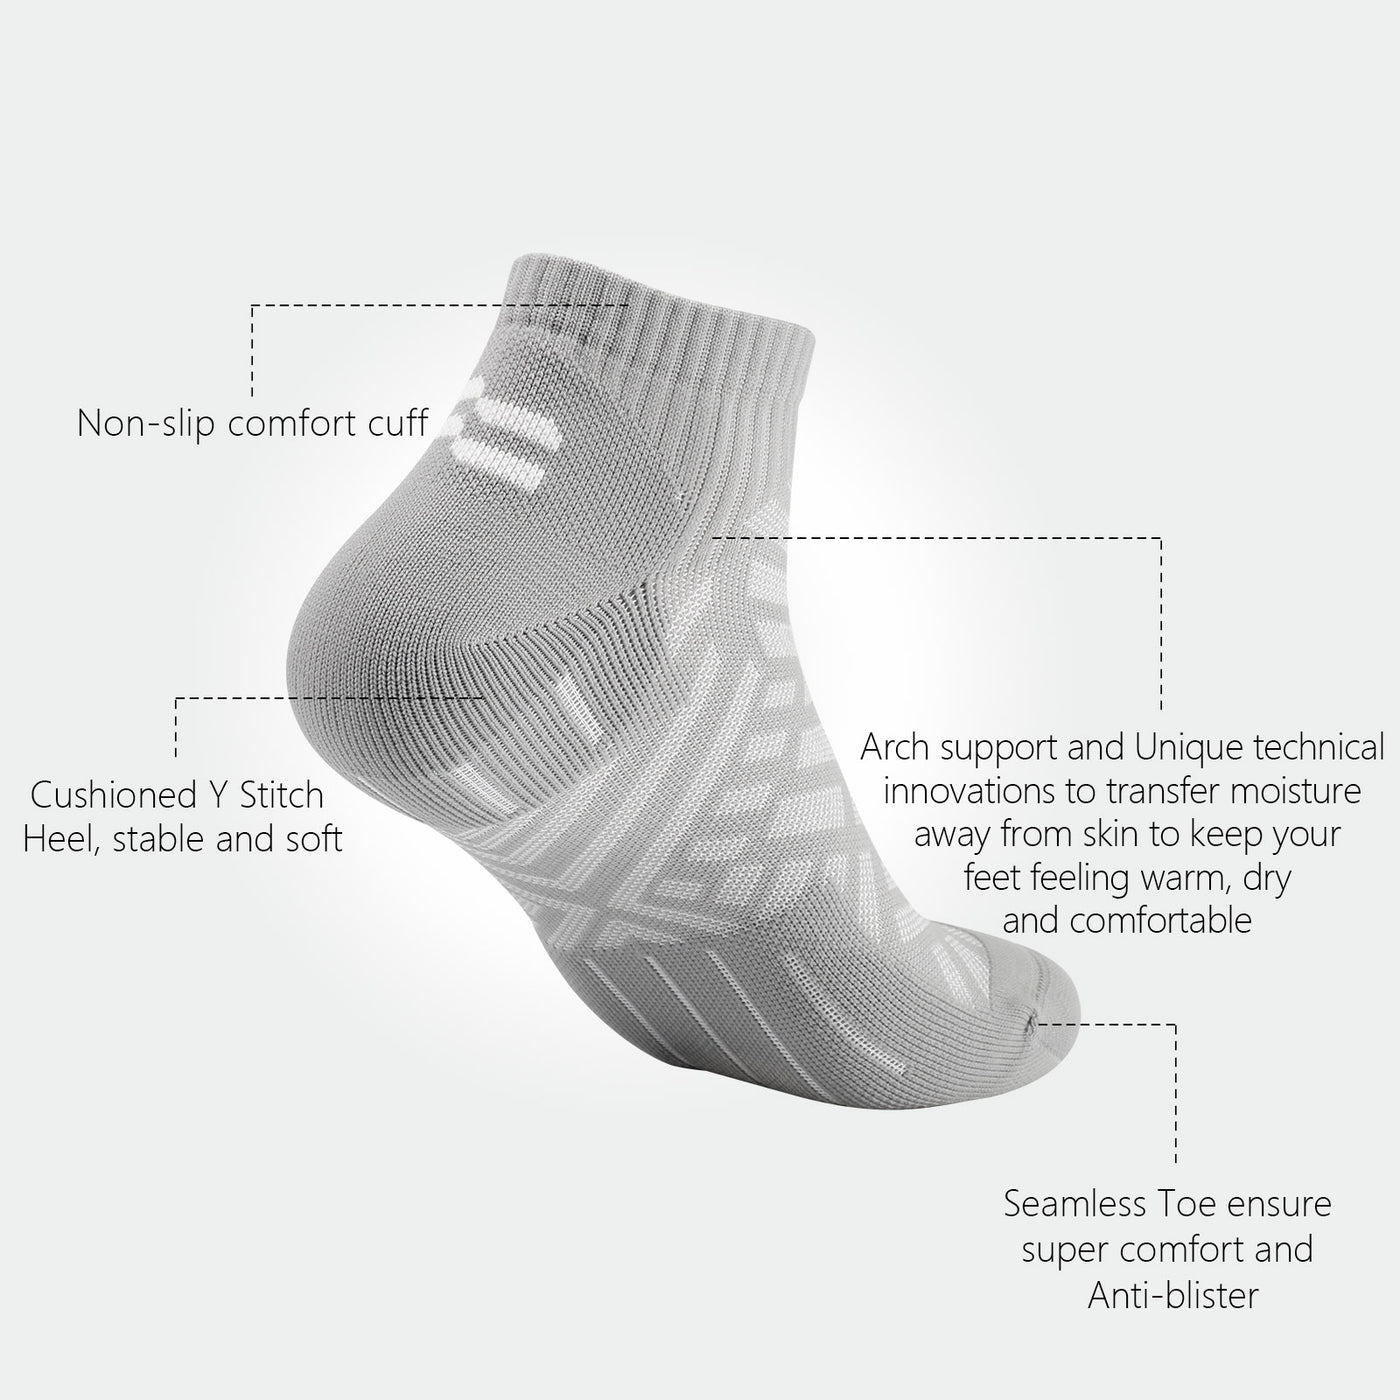 2 Pairs High Quality Men's Ankle Hiking Socks Size UK 7-11/ Europe 40-46